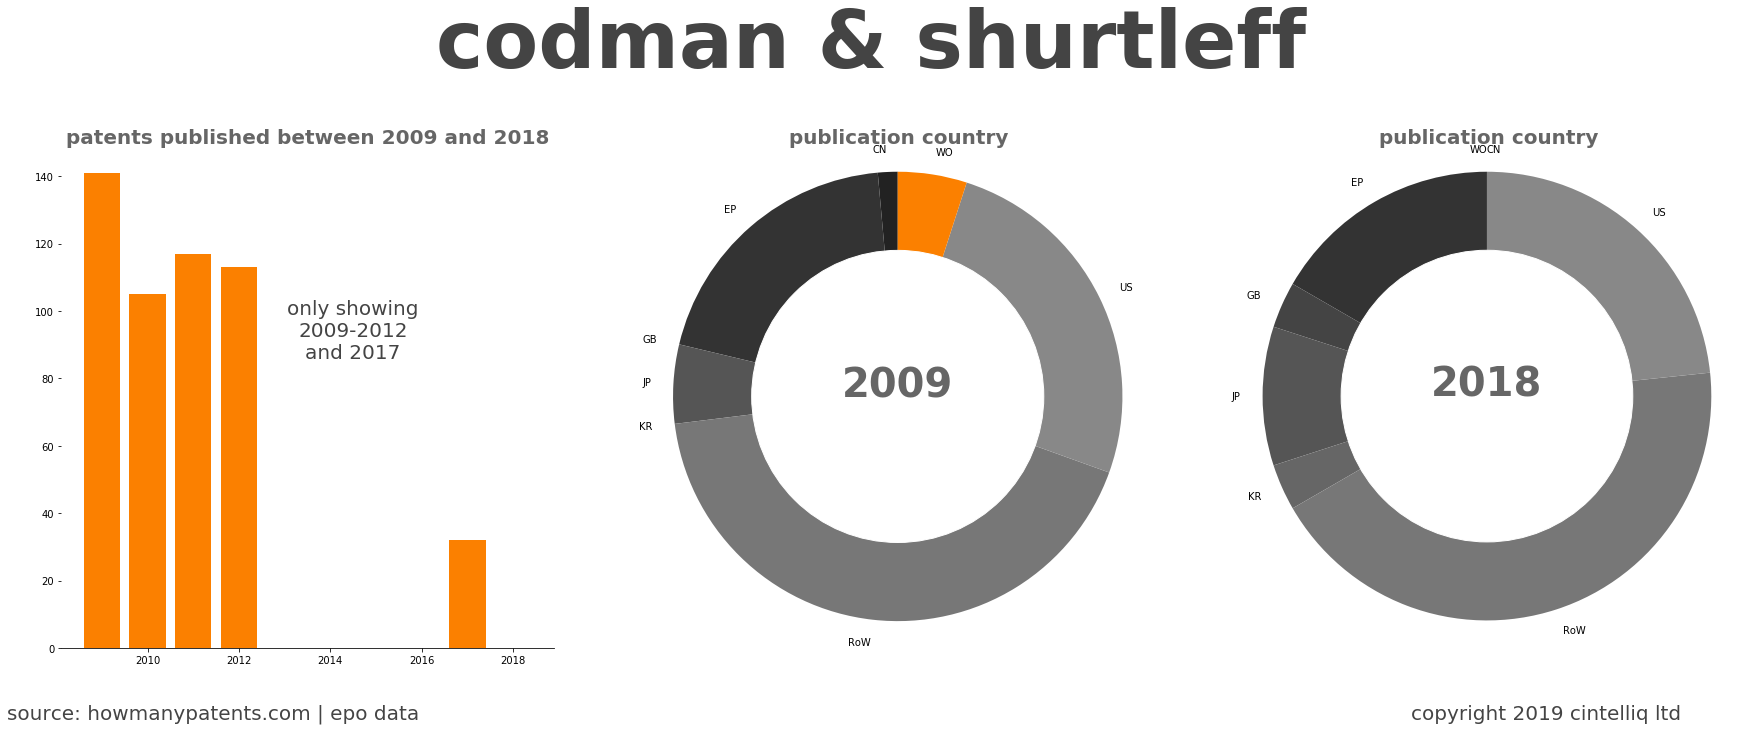 summary of patents for Codman & Shurtleff